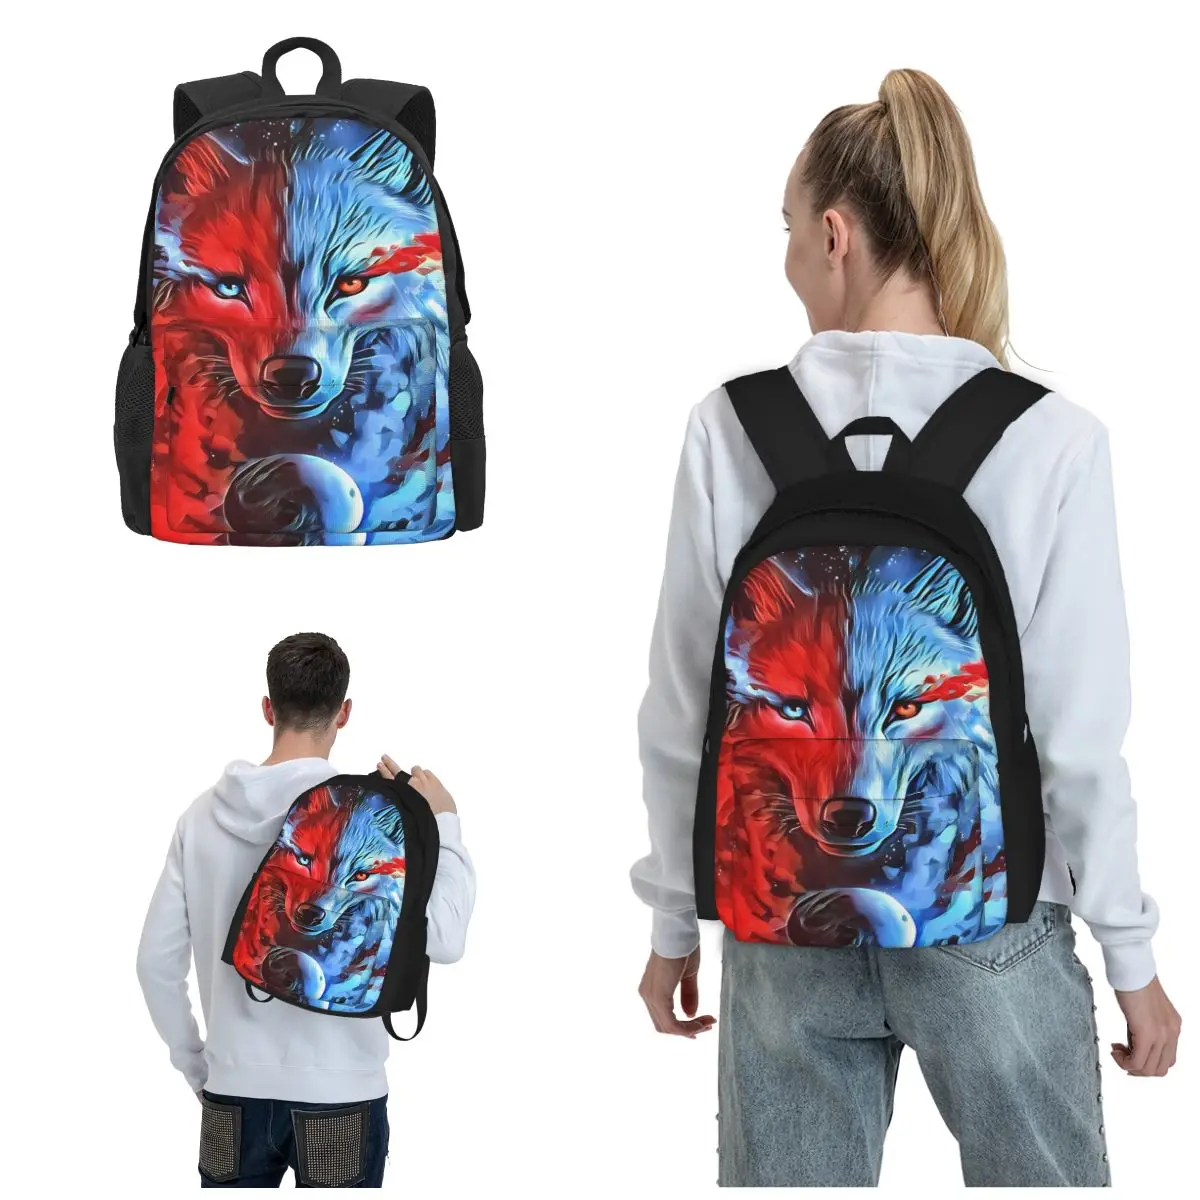 

Fire Wolf Print Outdoor Travel Portable Sports Bag Innovative Features Make Our Backpacks Ideal For Tech-Savvy Travelers